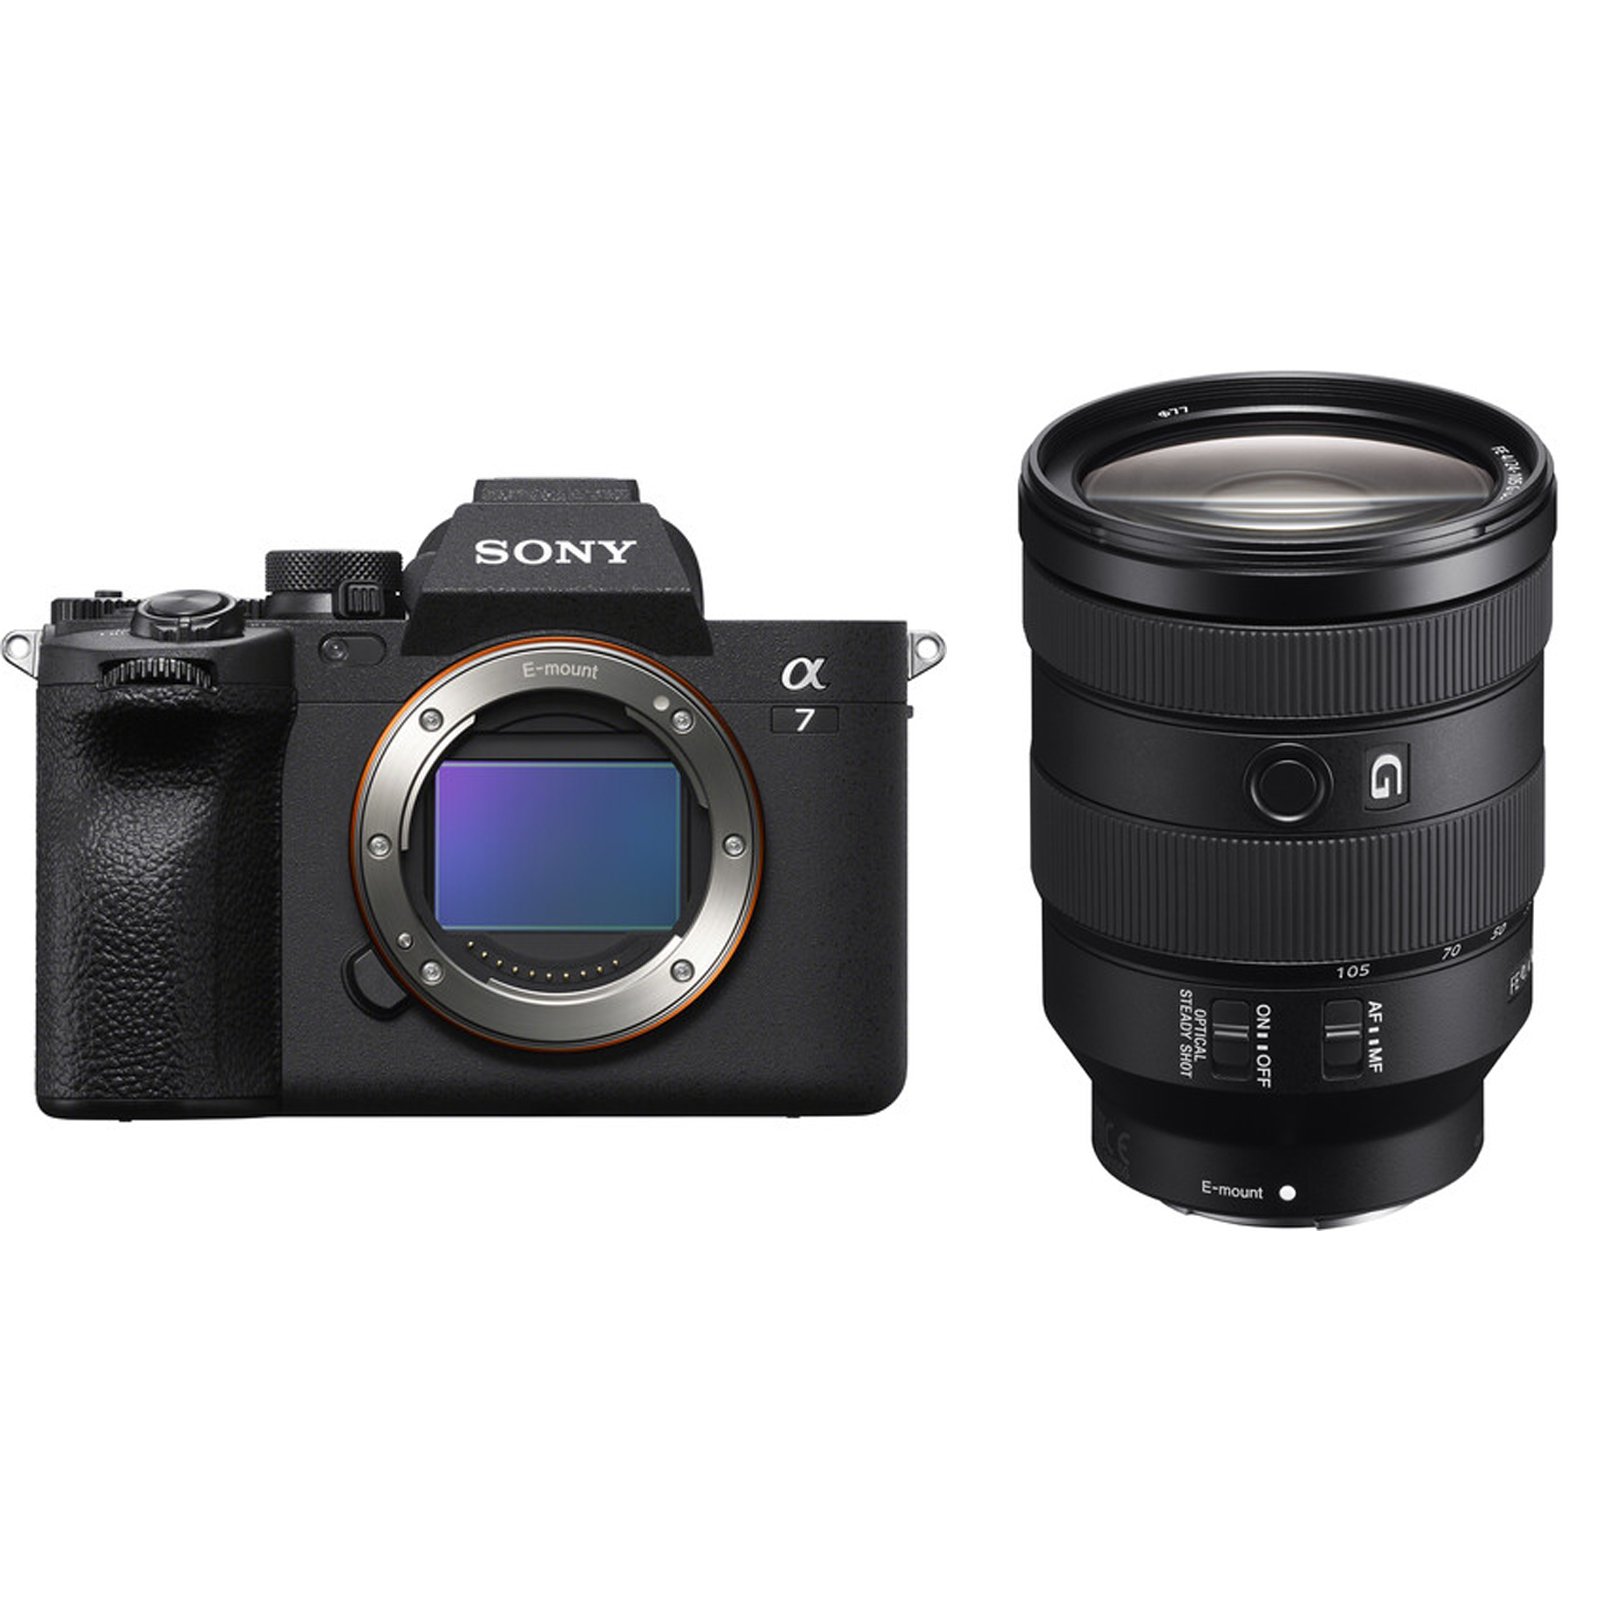 Image of Sony A7 IV Digital Camera with 24105mm Lens